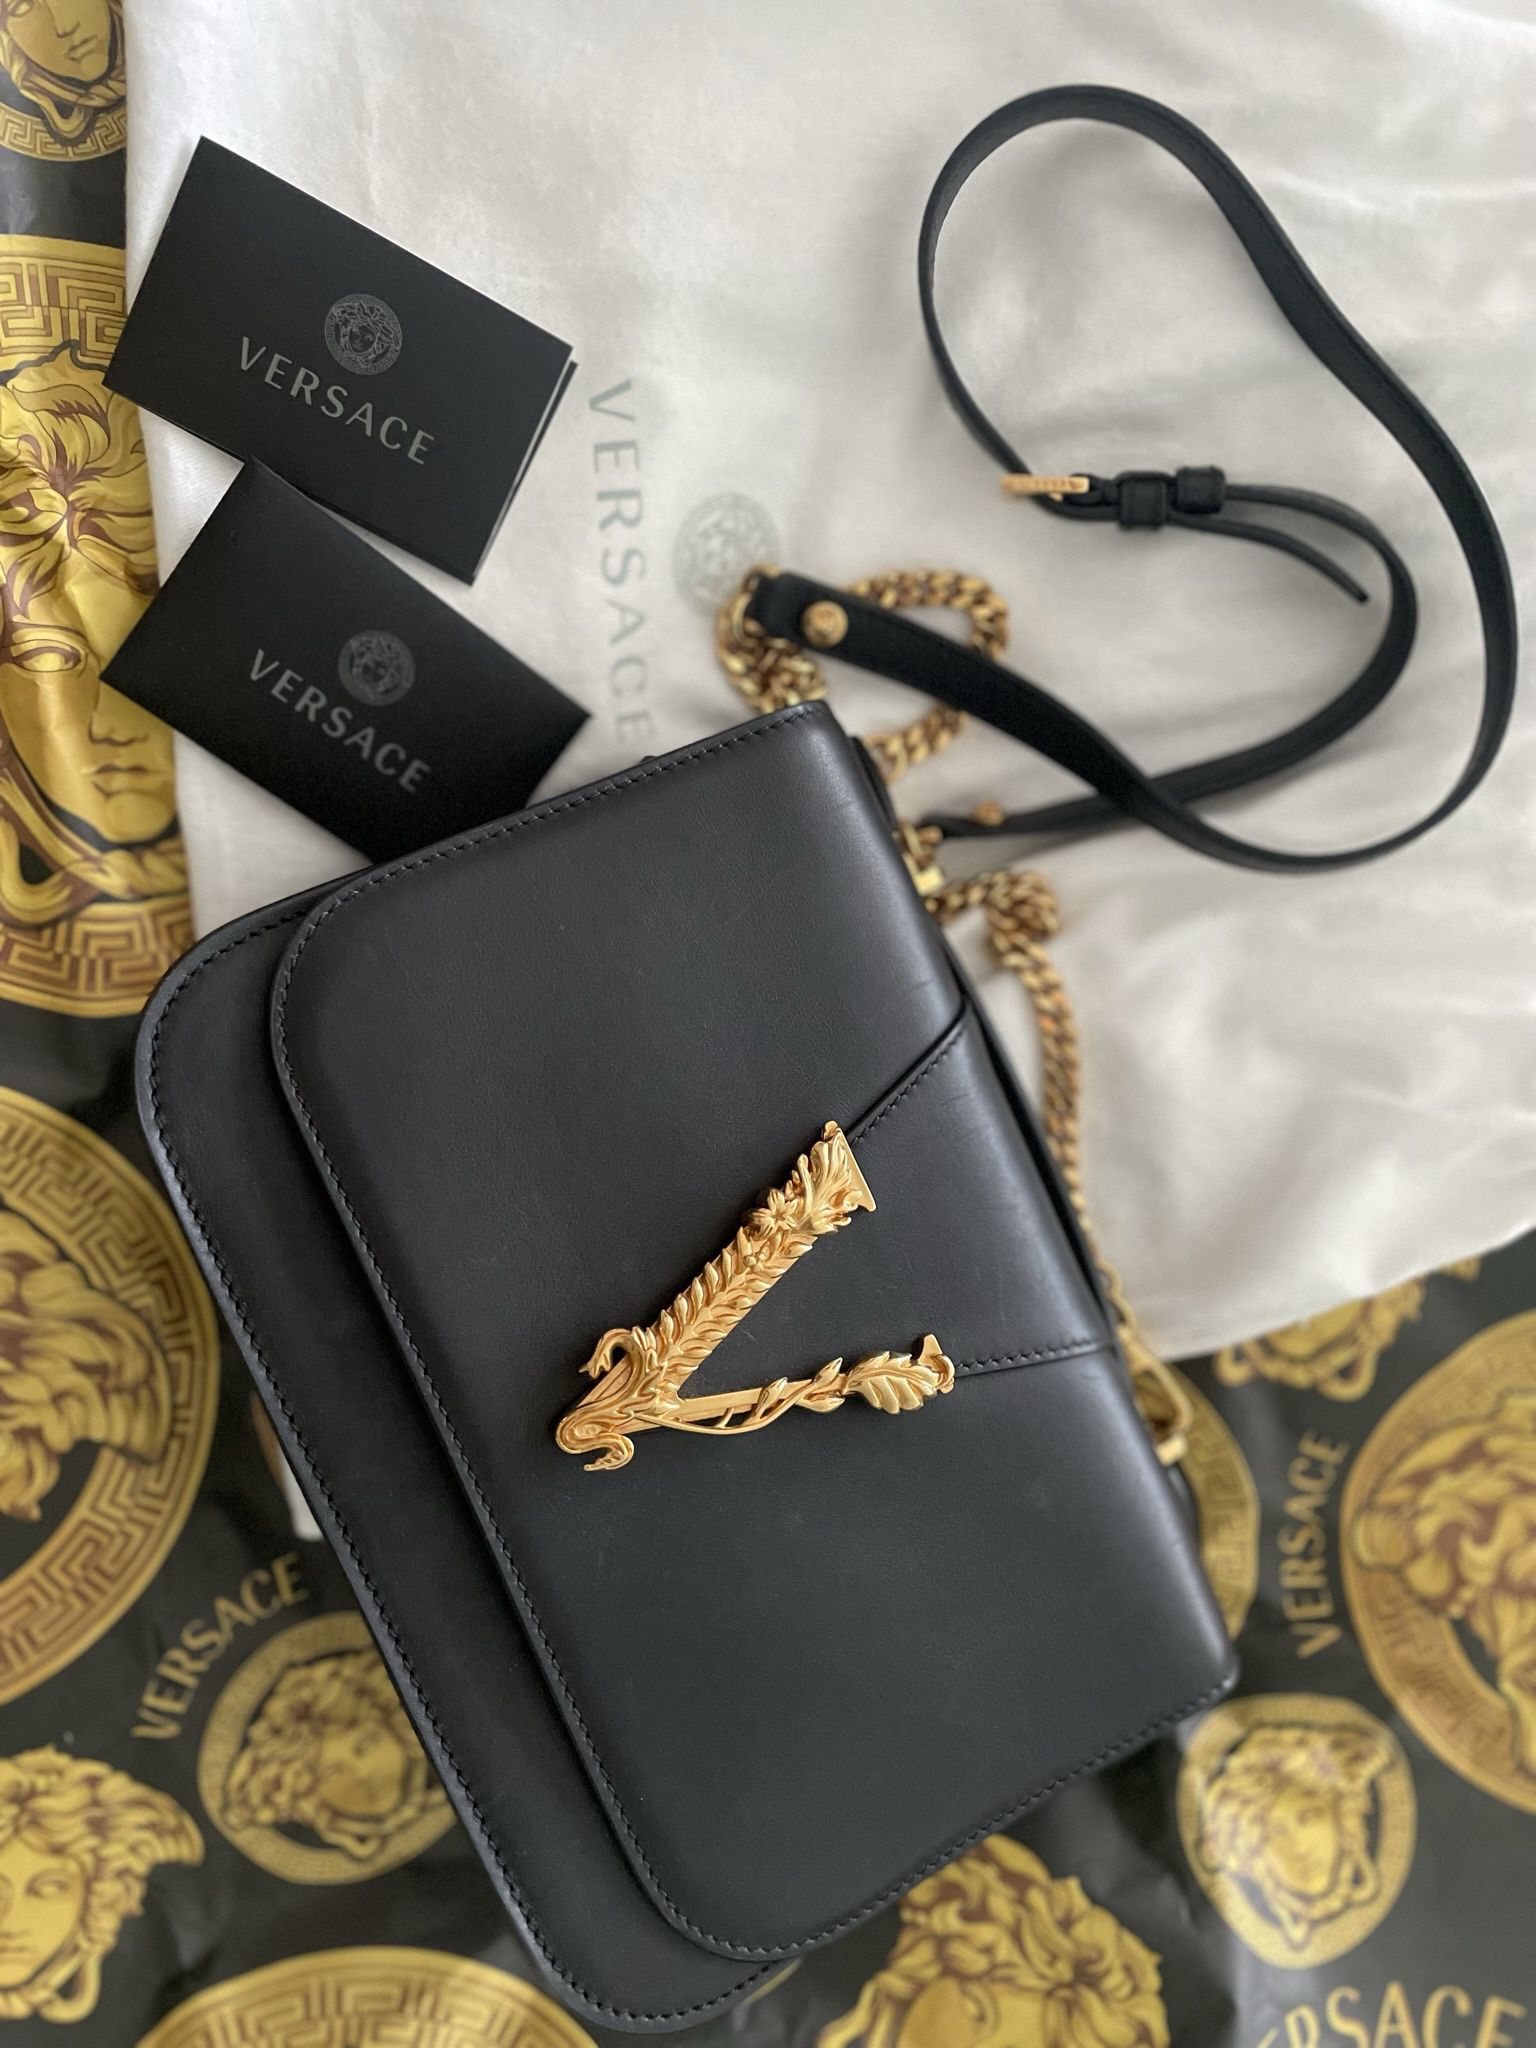 Versace Virtus Black Bag With Gold Chains